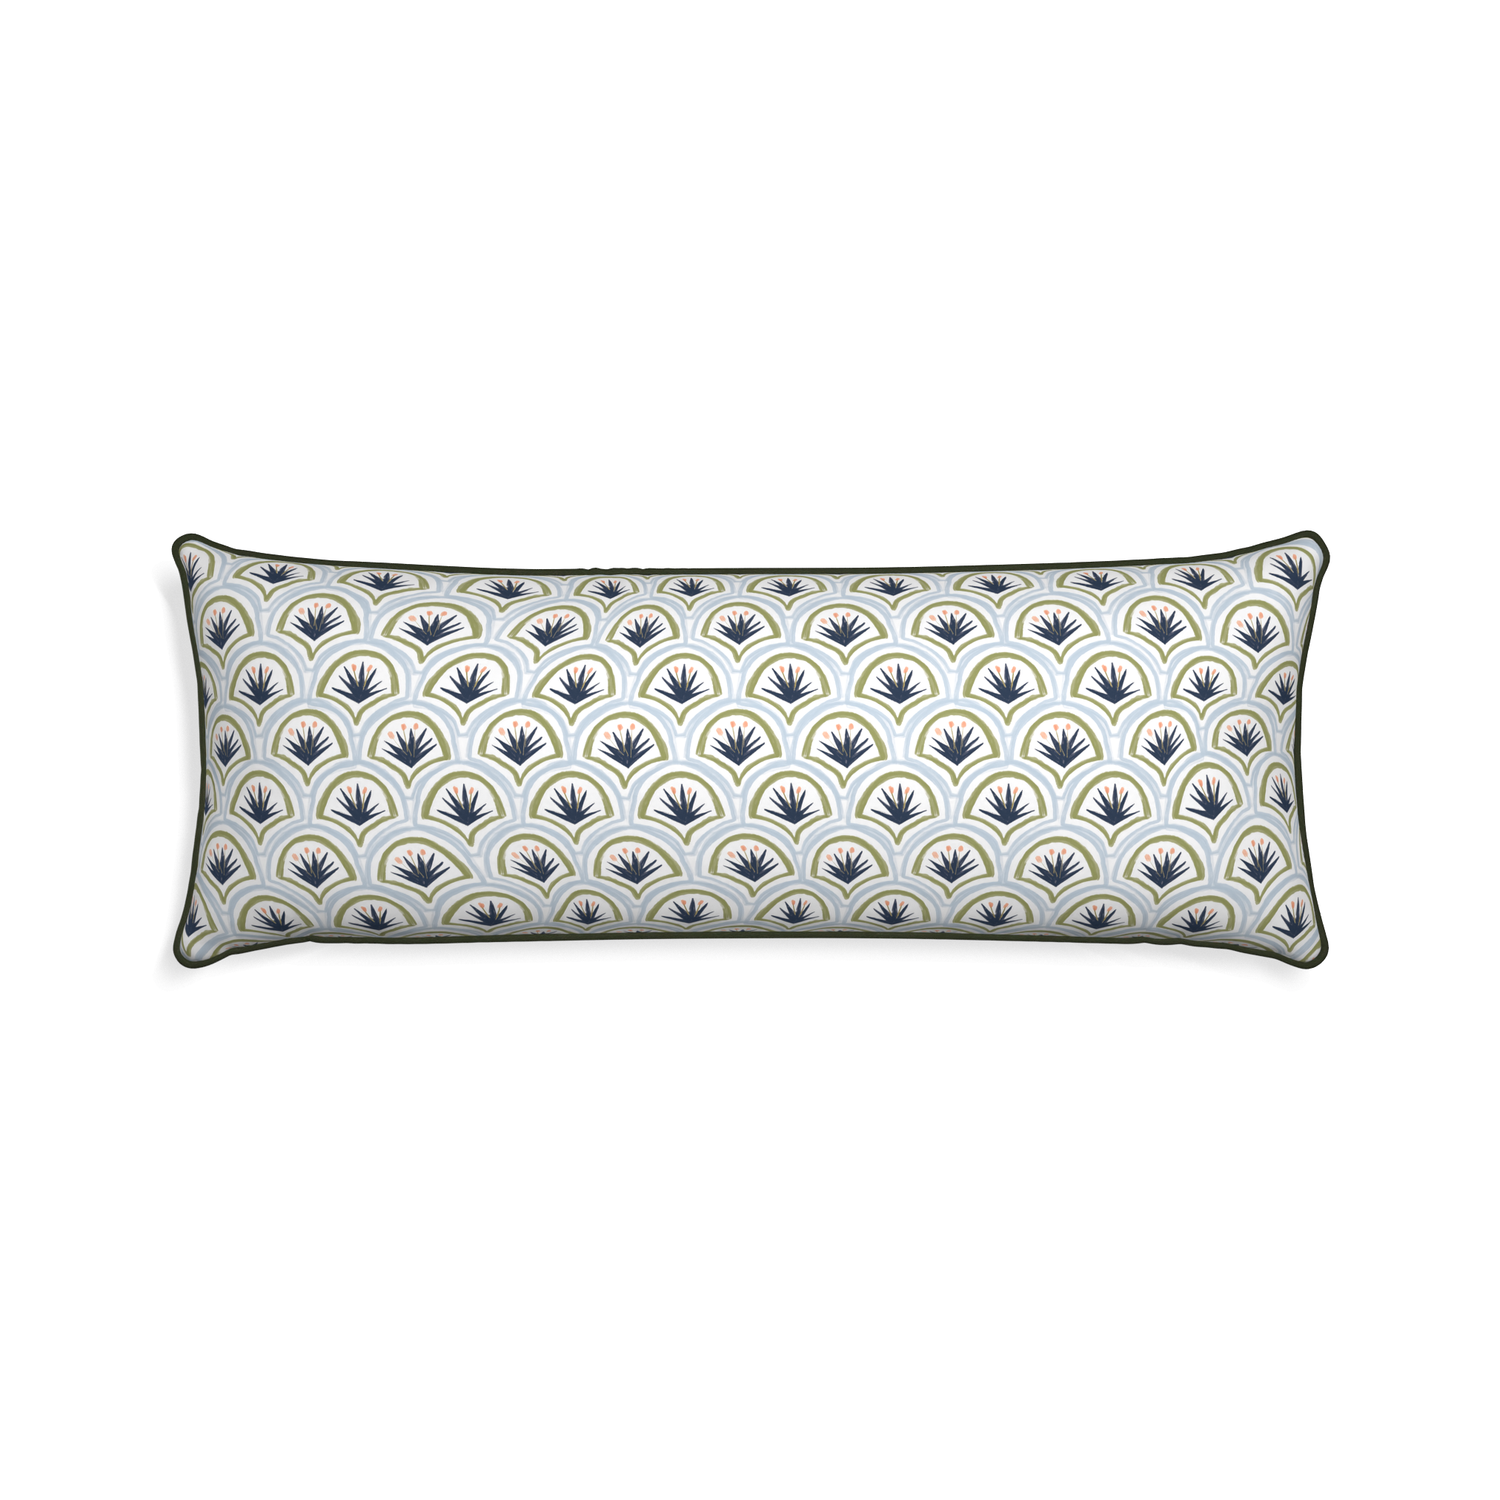 Xl-lumbar thatcher midnight custom art deco palm patternpillow with f piping on white background